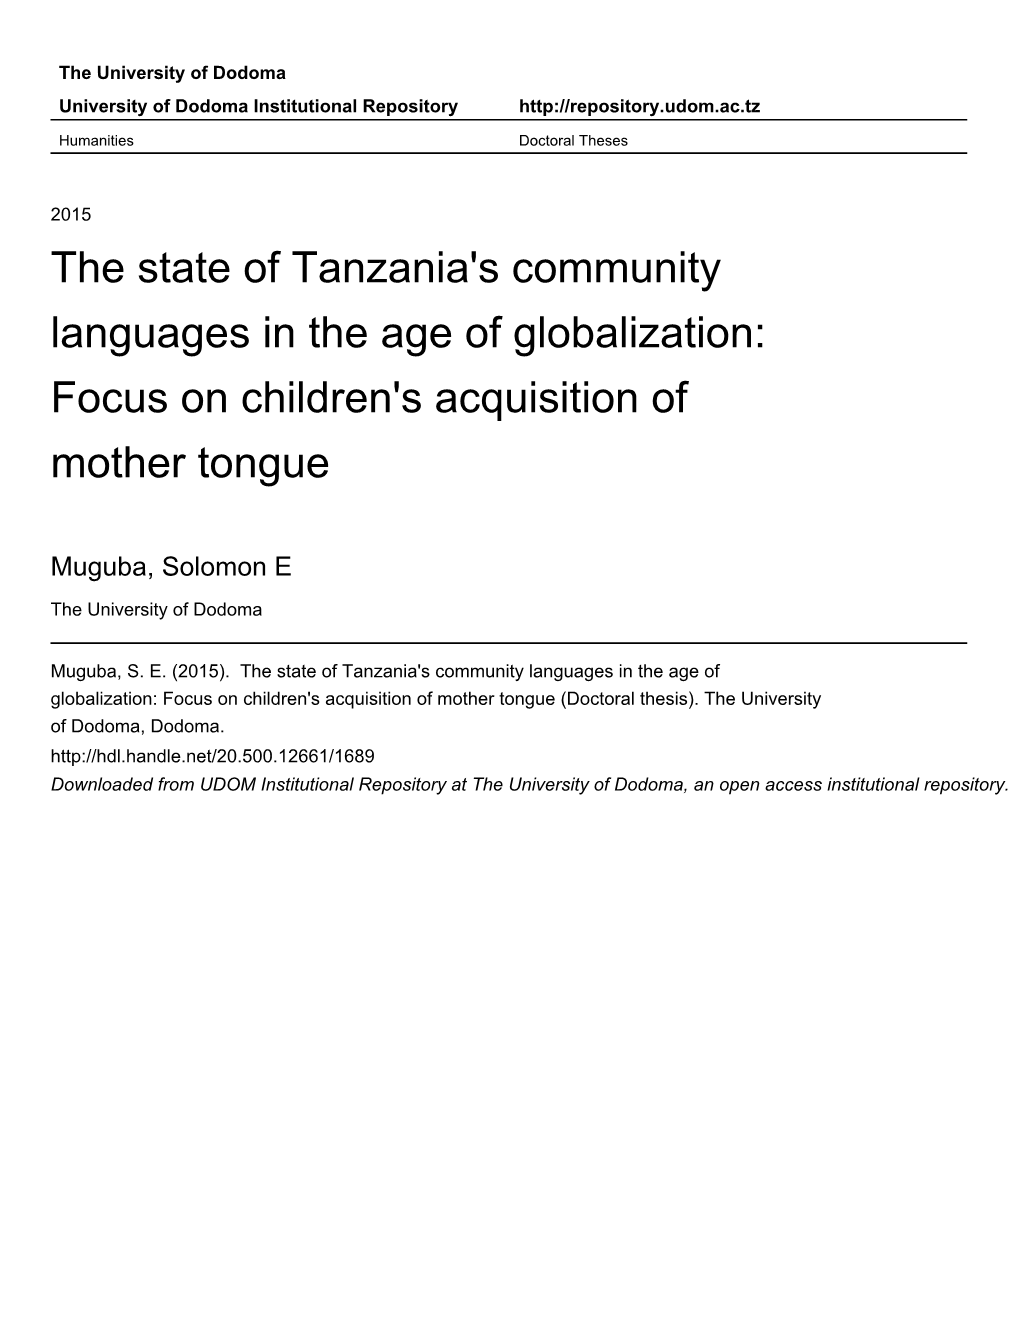 Focus on Children's Acquisition of Mother Tongue